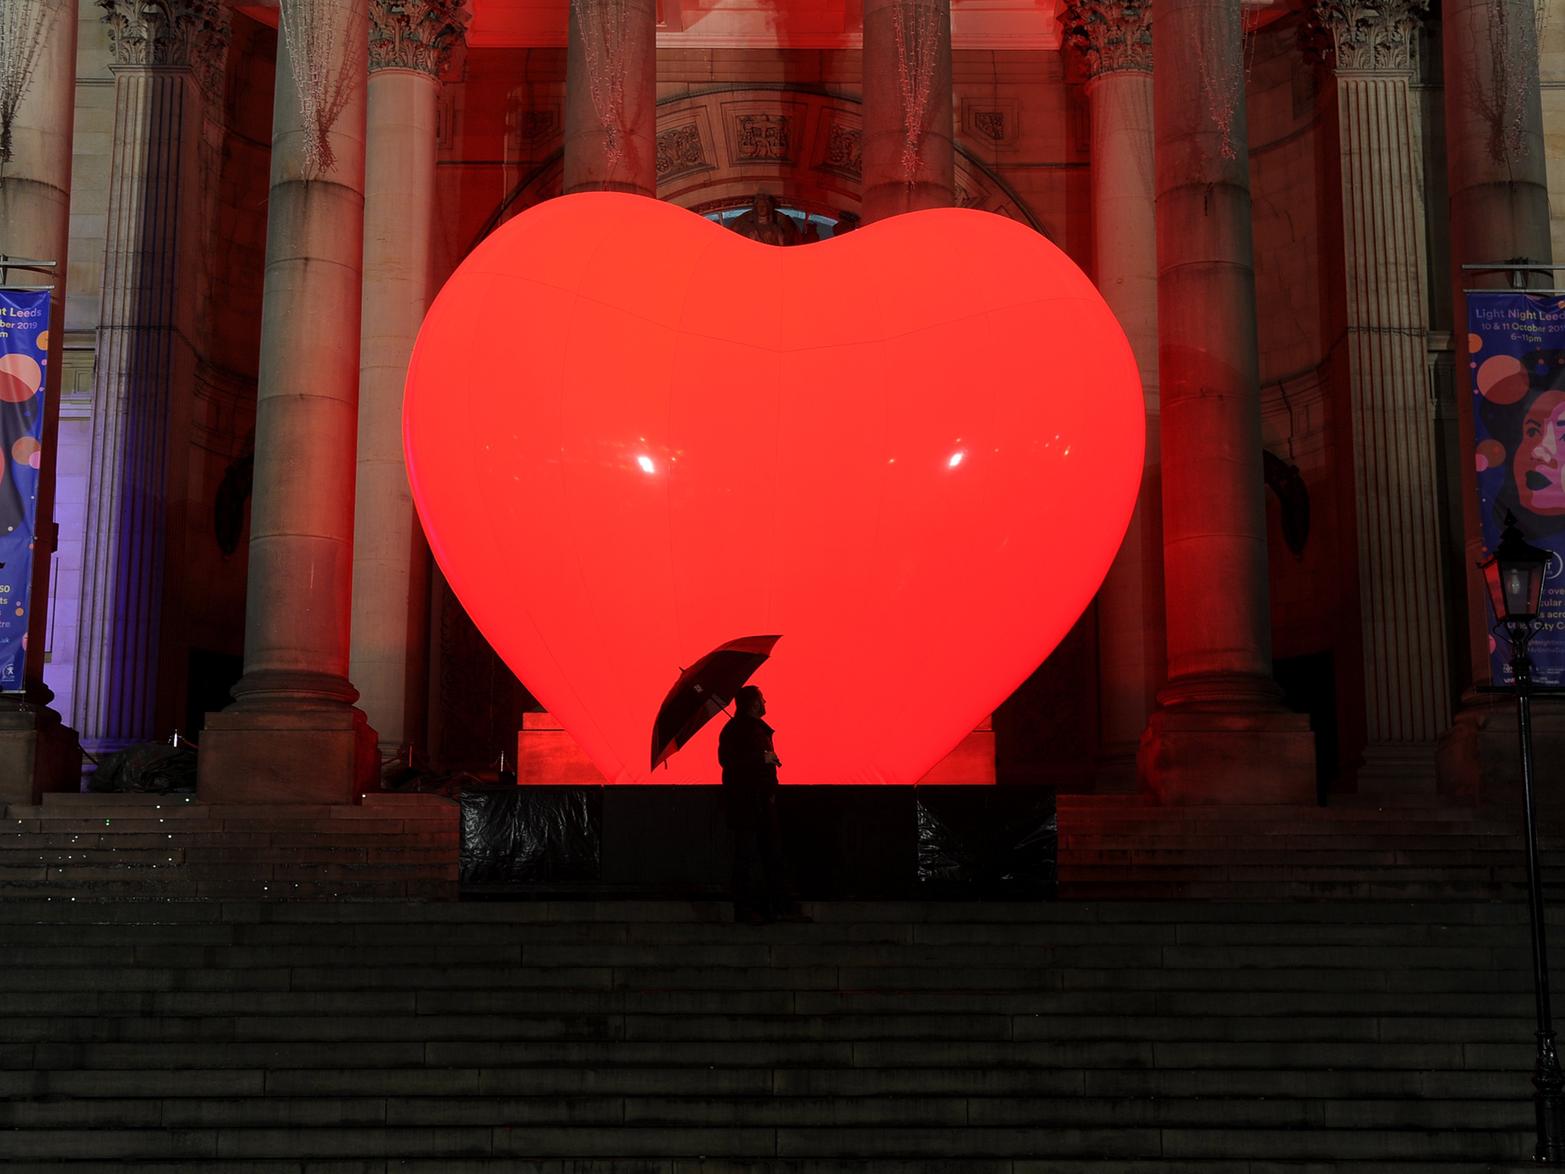 With Love by Franck Pelletier (France) in front of Town Hall.